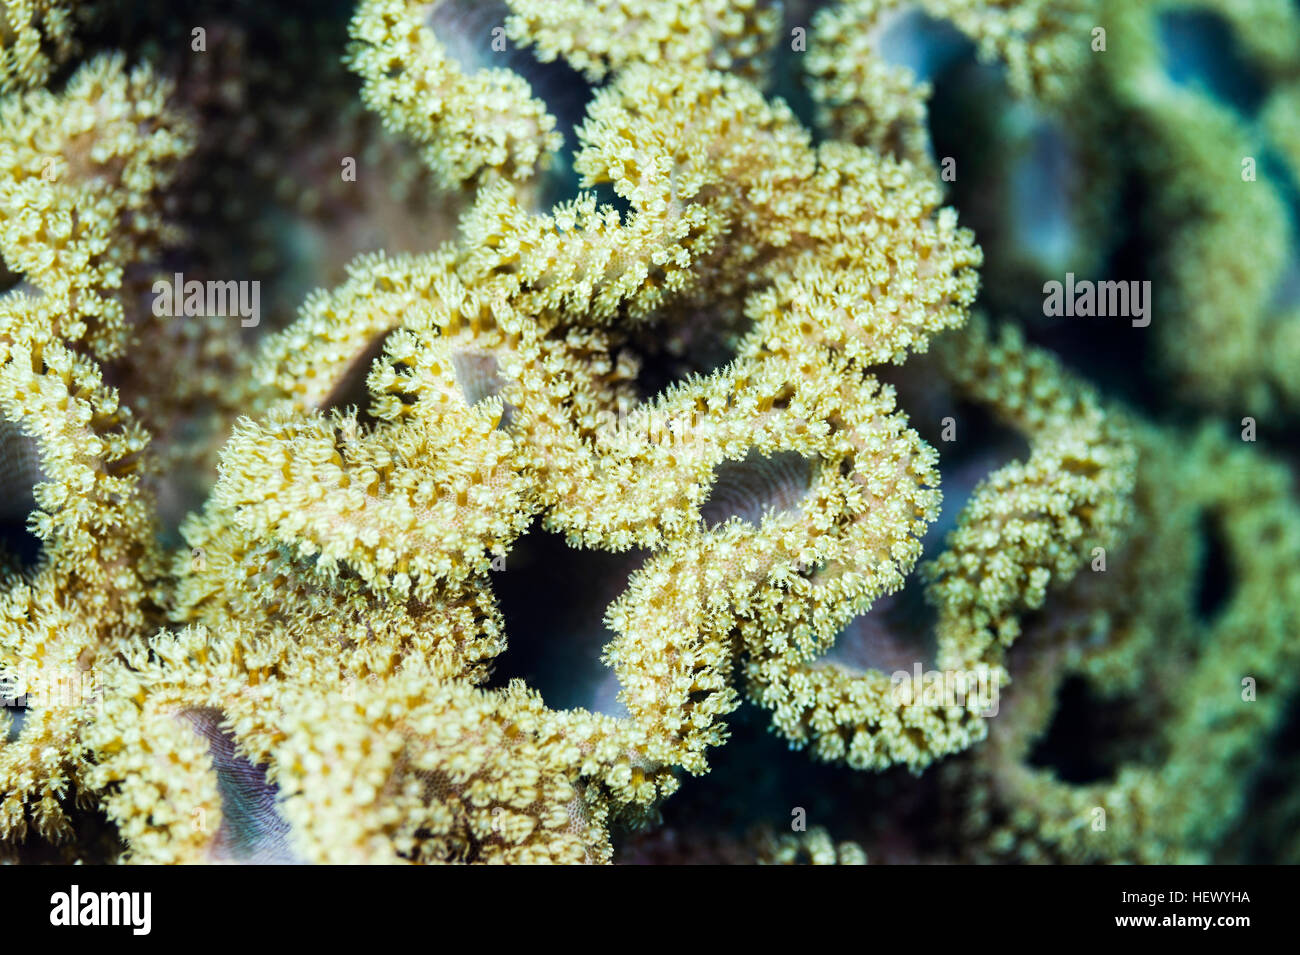 Twisting folds of Coral expand its polyps to feed in the Gulf of Oman Stock Photo